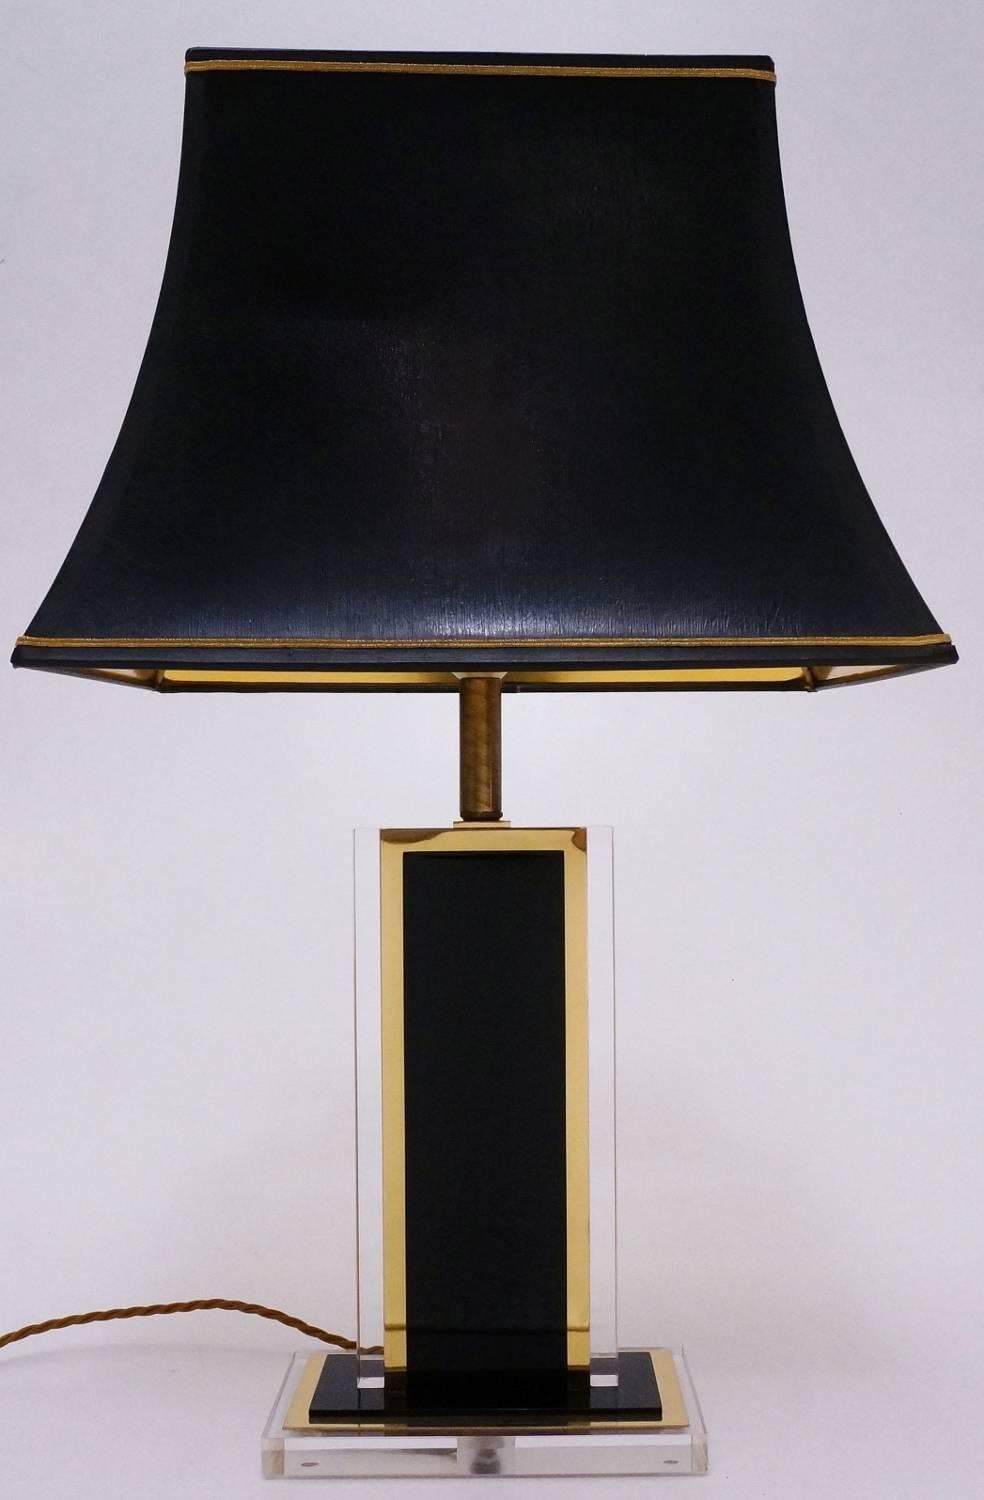 Romeo Rega Lucite and brass table lamp, circa 1970s, Italian.

This lamp has been thoroughly cleaned respecting the vintage patina. Newly rewired and earthed with new brass lamp holder, gold toned silk cable, new plug and new black cord switch.